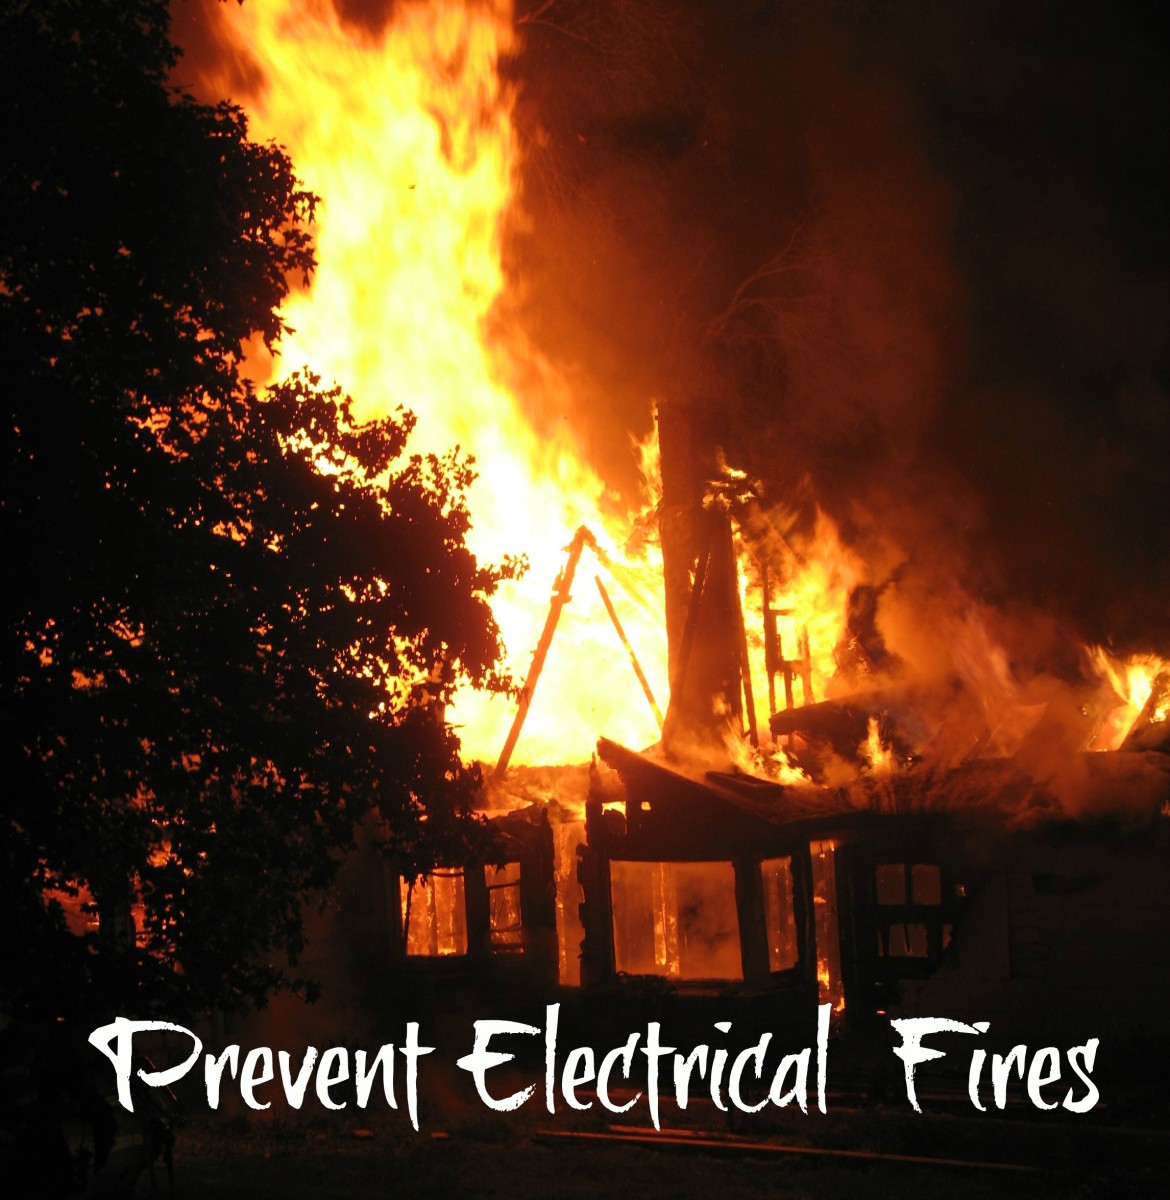 Home electrical fires are preventable, but they happen all the time. Don't let it happen to you and be particularly careful in the holiday season.